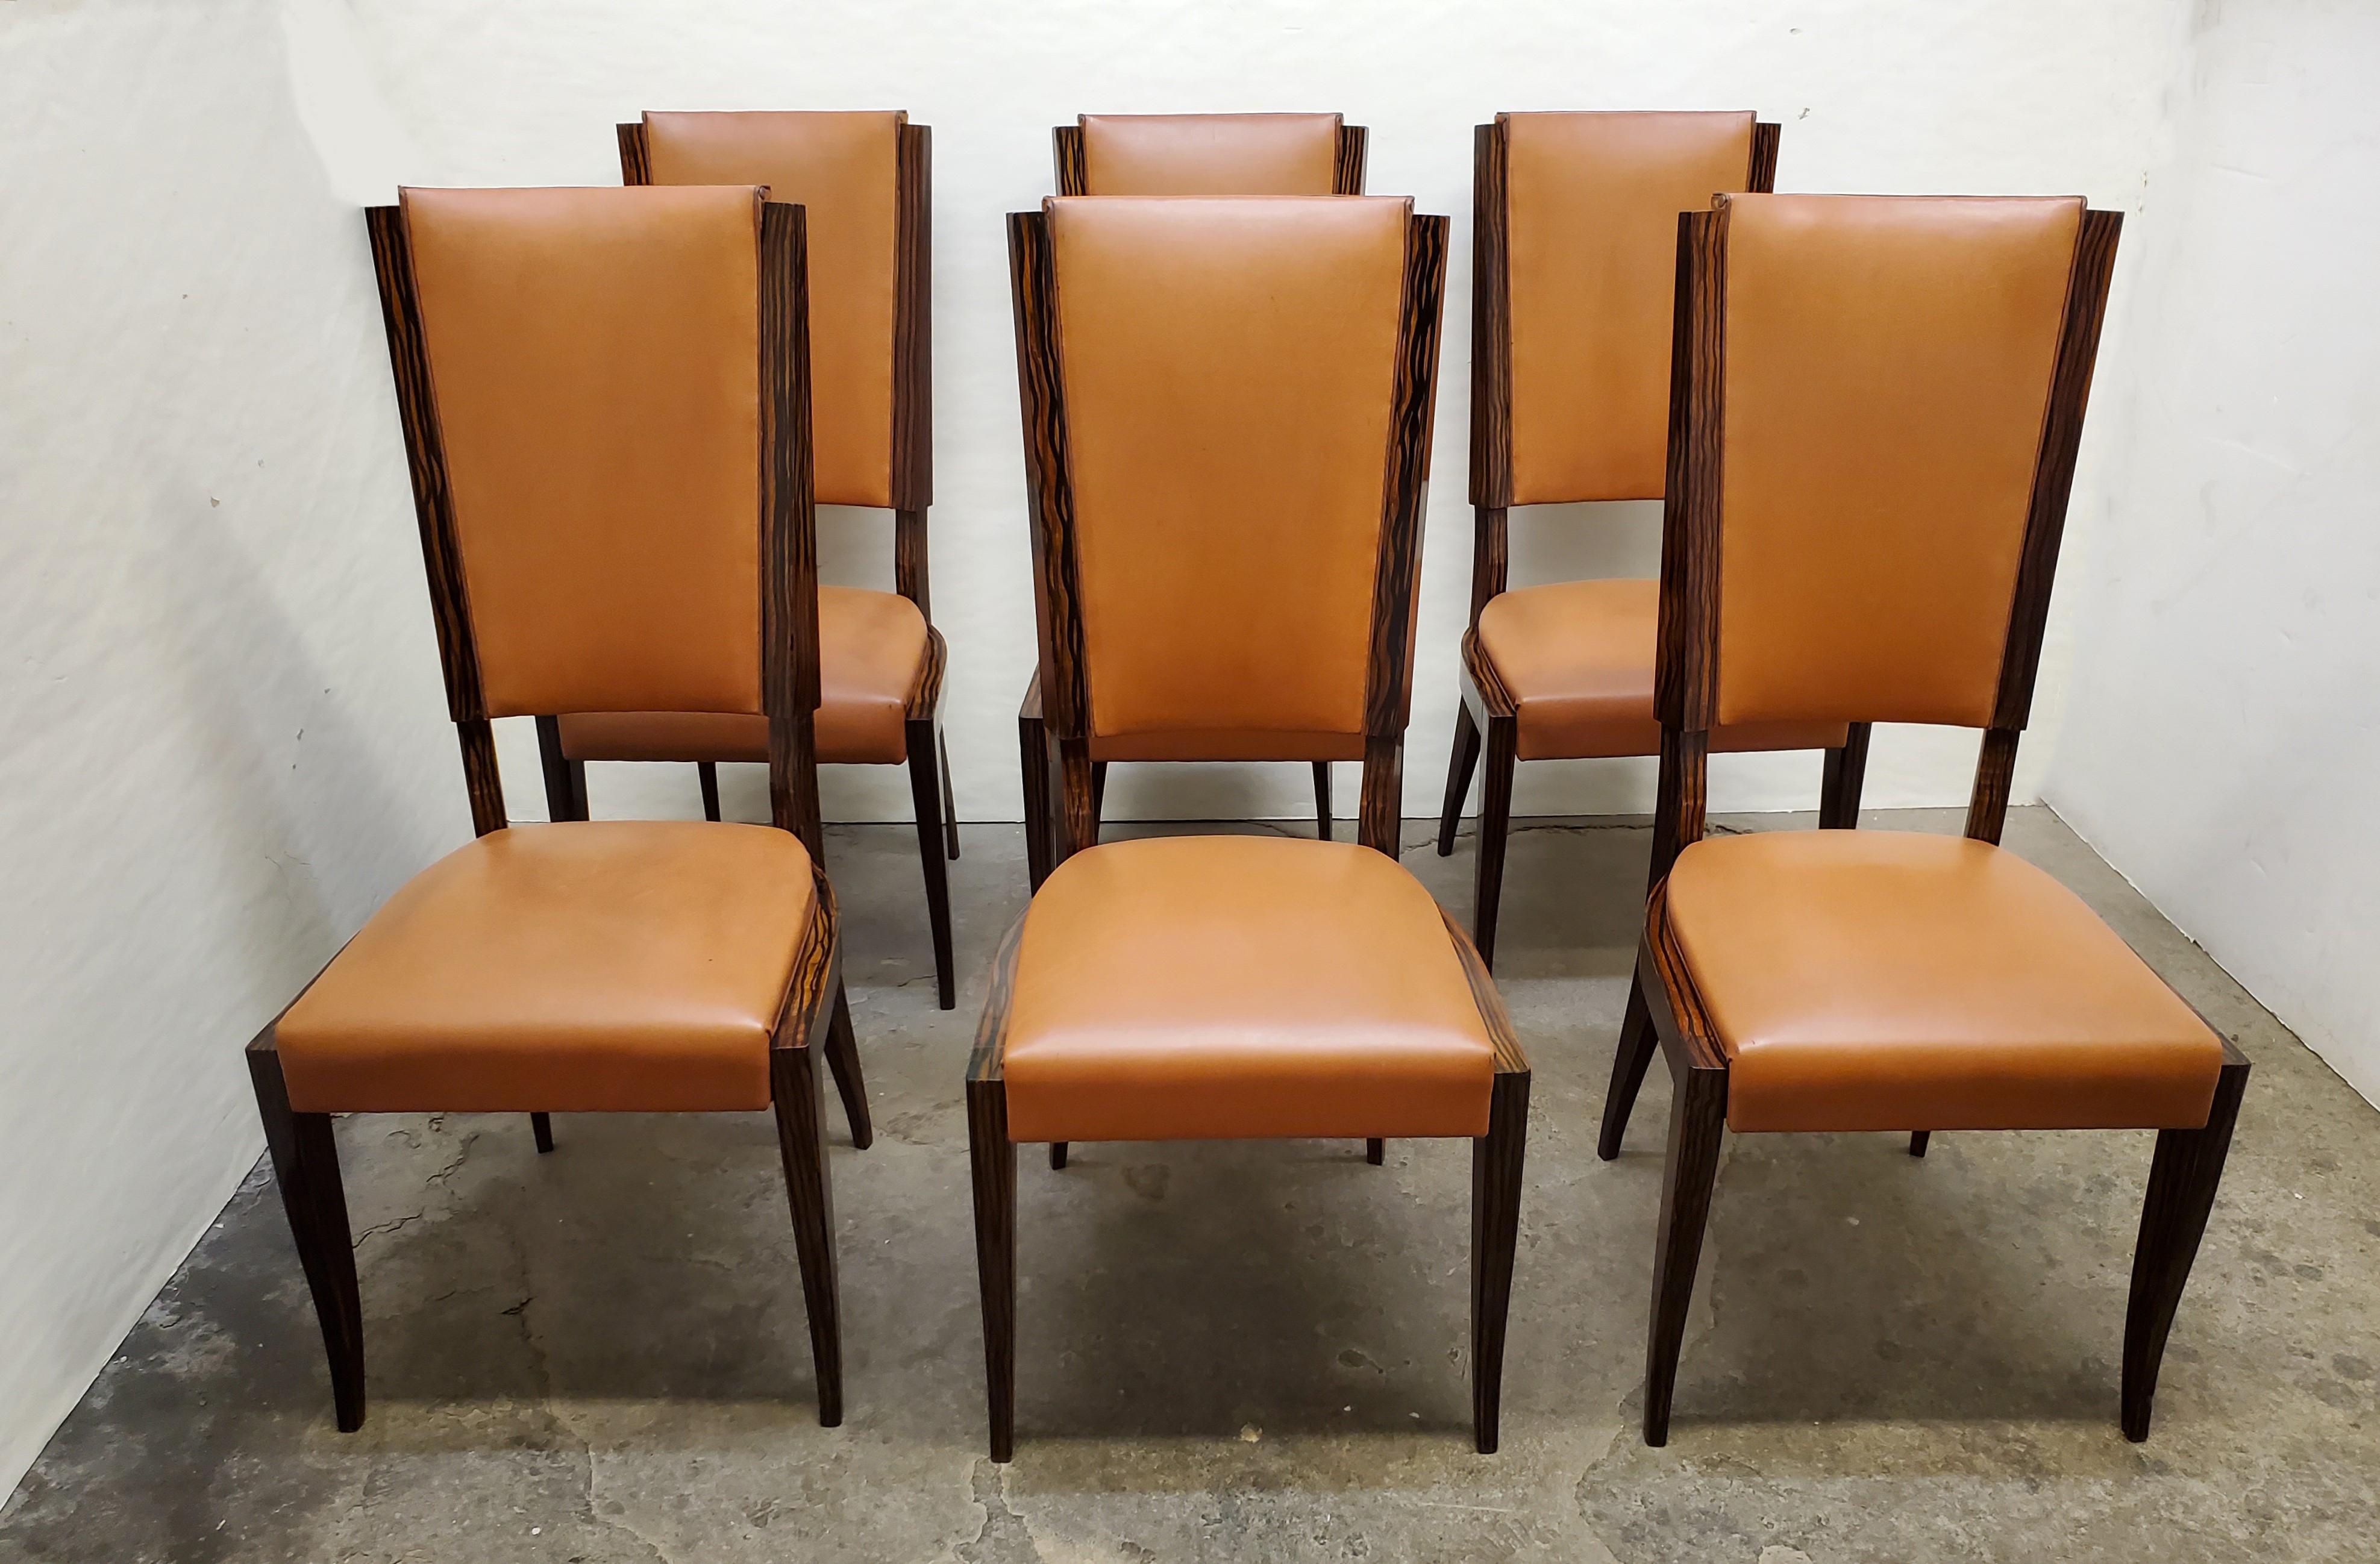 Set of Six Original French Art Deco Faux Macassar Ebony Wood Dining Chairs For Sale 13